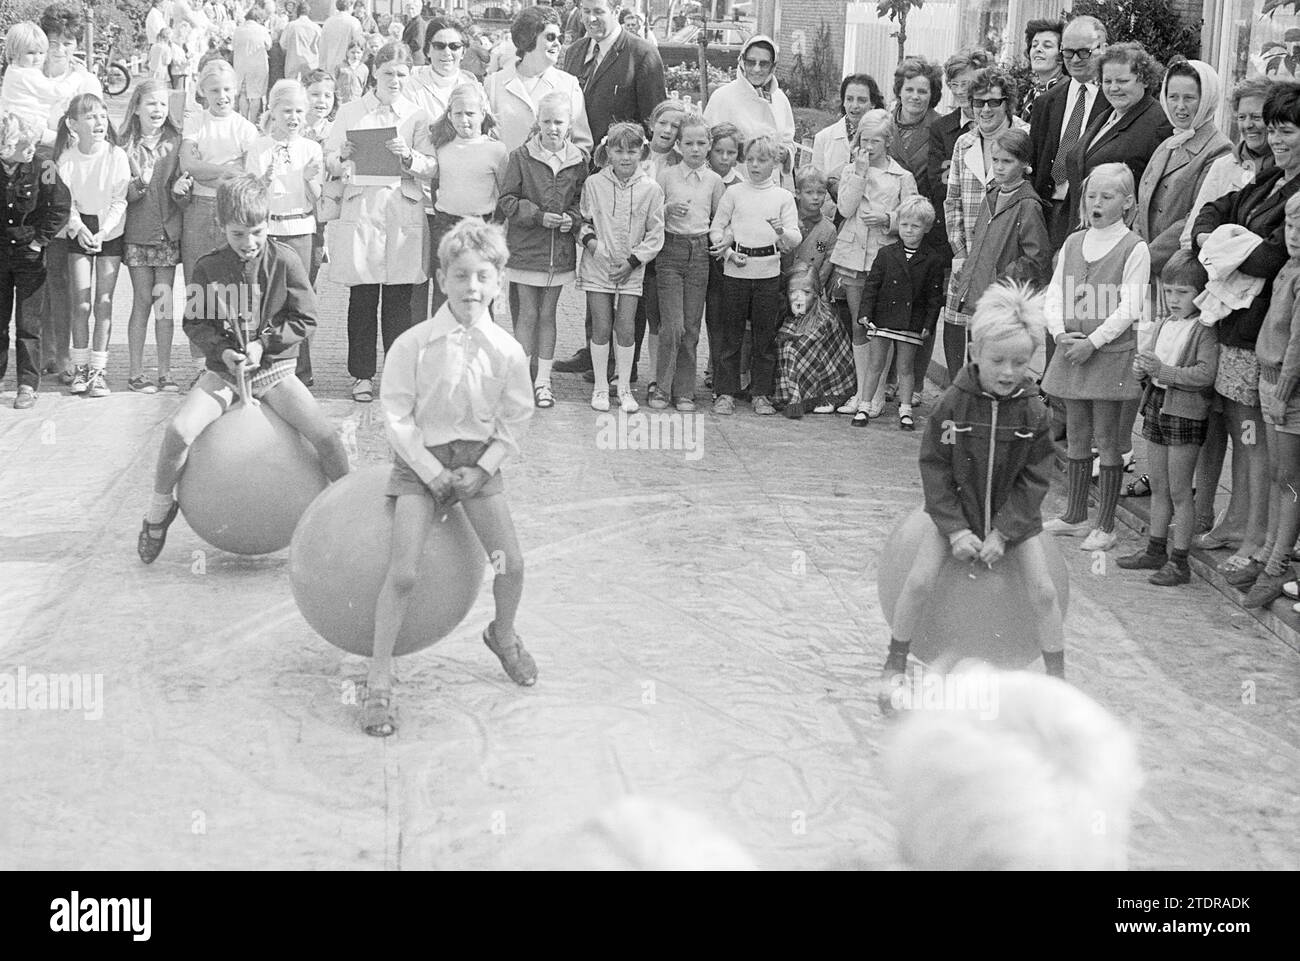 Skippyball competition De Zilk, Competitions, 01-09-1971, Whizgle News from the Past, Tailored for the Future. Explore historical narratives, Dutch The Netherlands agency image with a modern perspective, bridging the gap between yesterday's events and tomorrow's insights. A timeless journey shaping the stories that shape our future Stock Photo